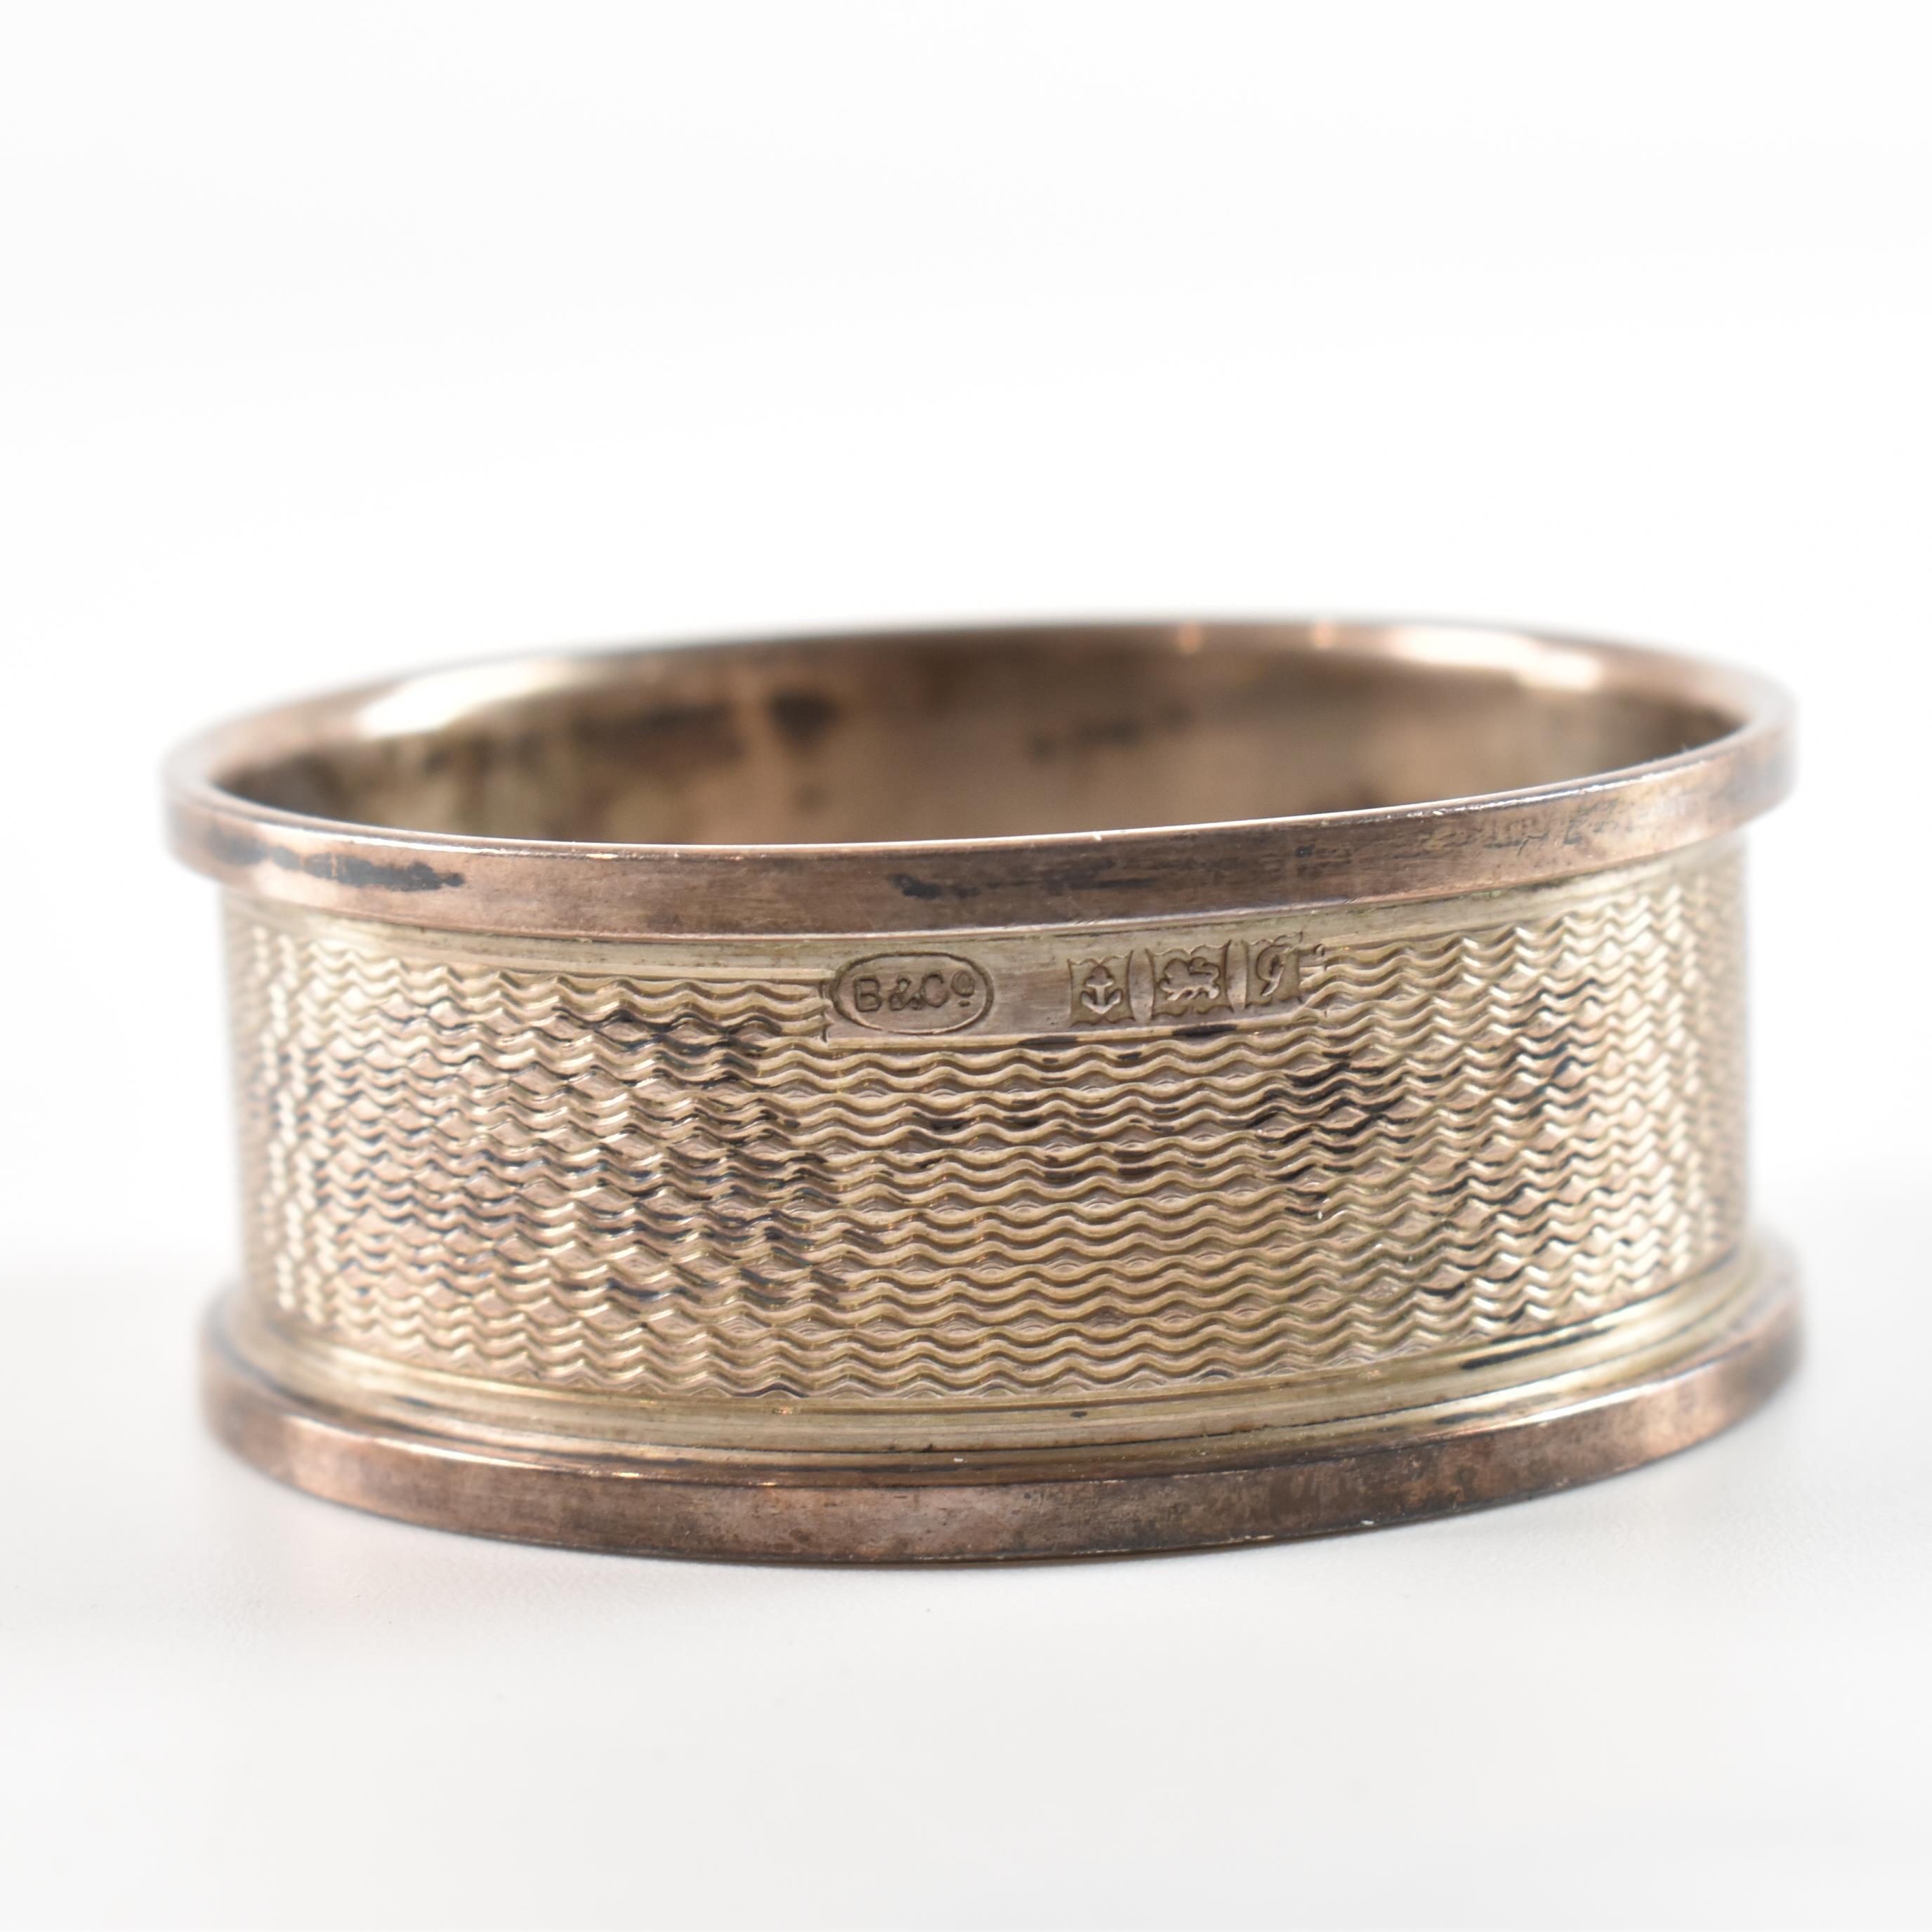 SIX 20TH CENTURY HALLMARKED SILVER NAPKIN RINGS OF VARIOUS SHAPES - Image 3 of 8